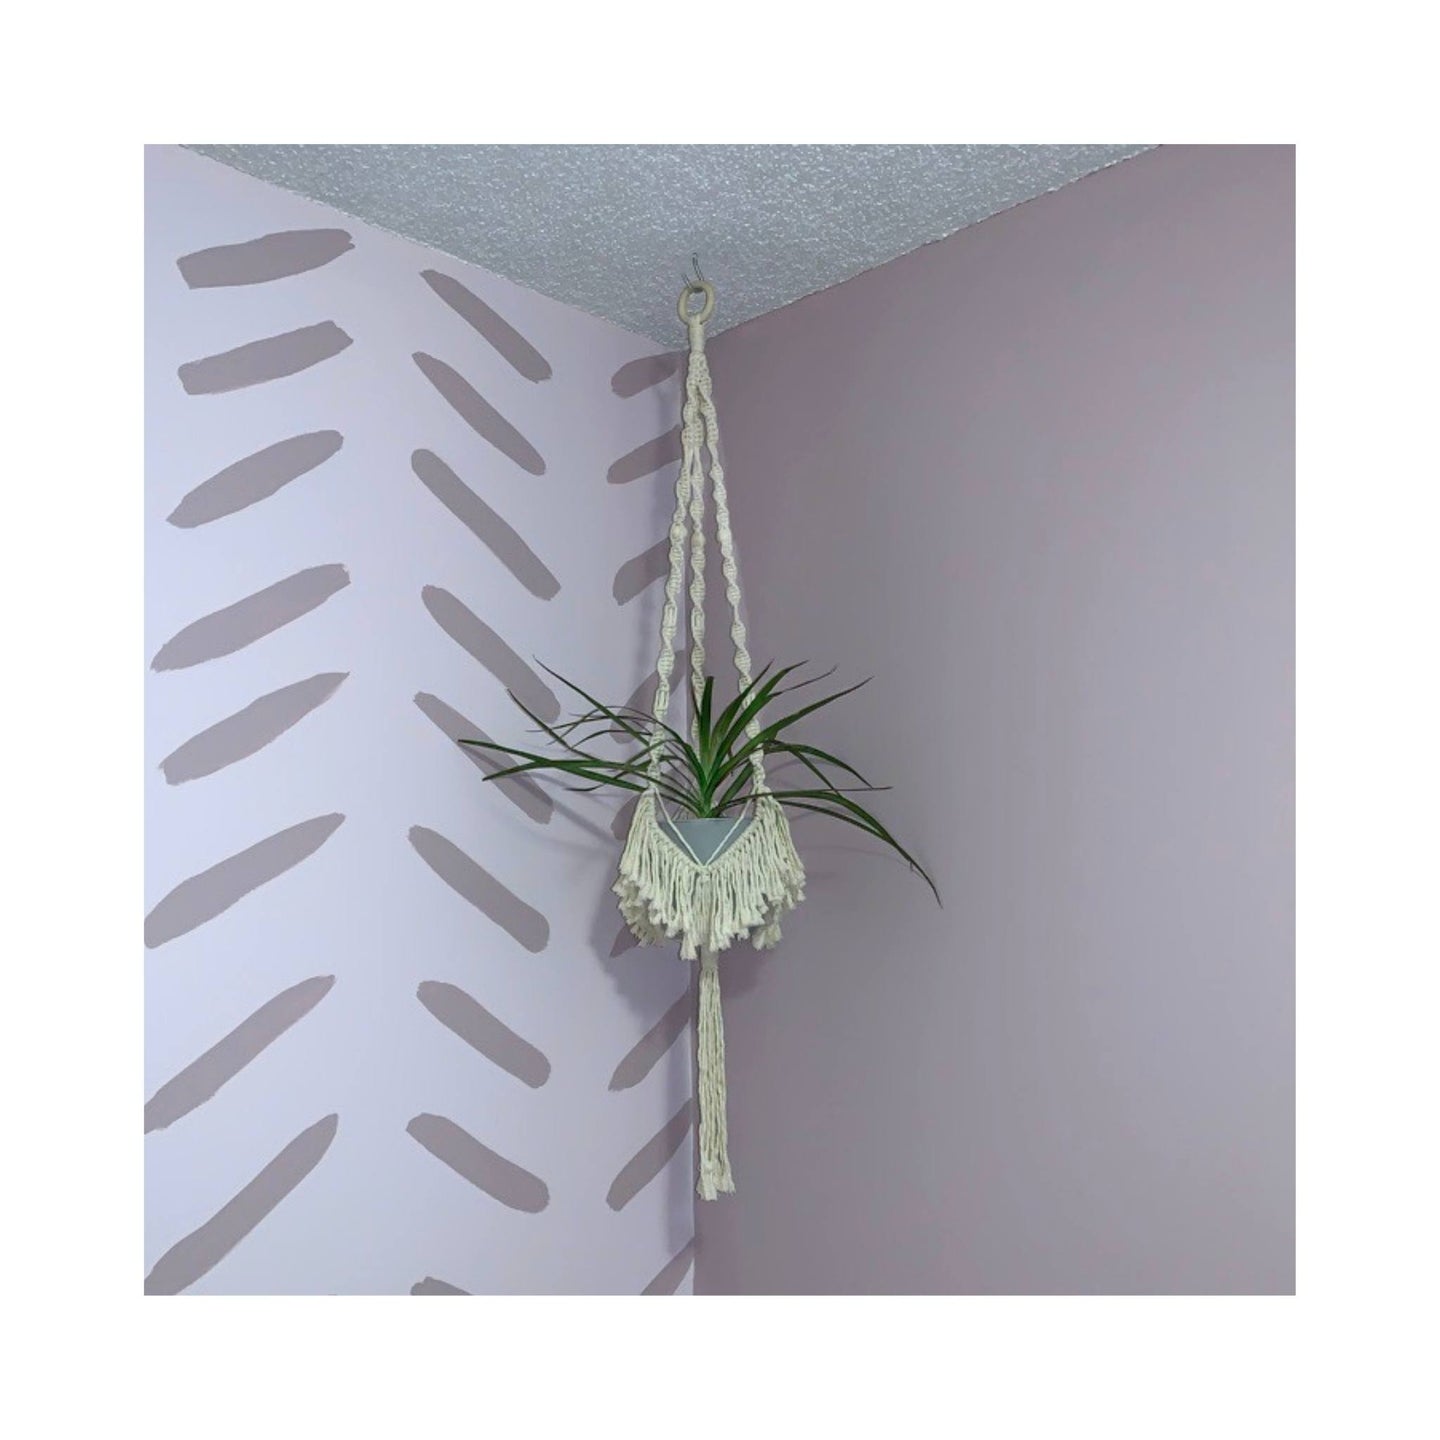 Blanche style macrame plant hanger from The Golden Collection. This hanger is secured at the top with a wooden ring held by three twisted spindles ending with some fun fringe at the bottom of the hanger. The recycled cotton cord is available in multiple shades